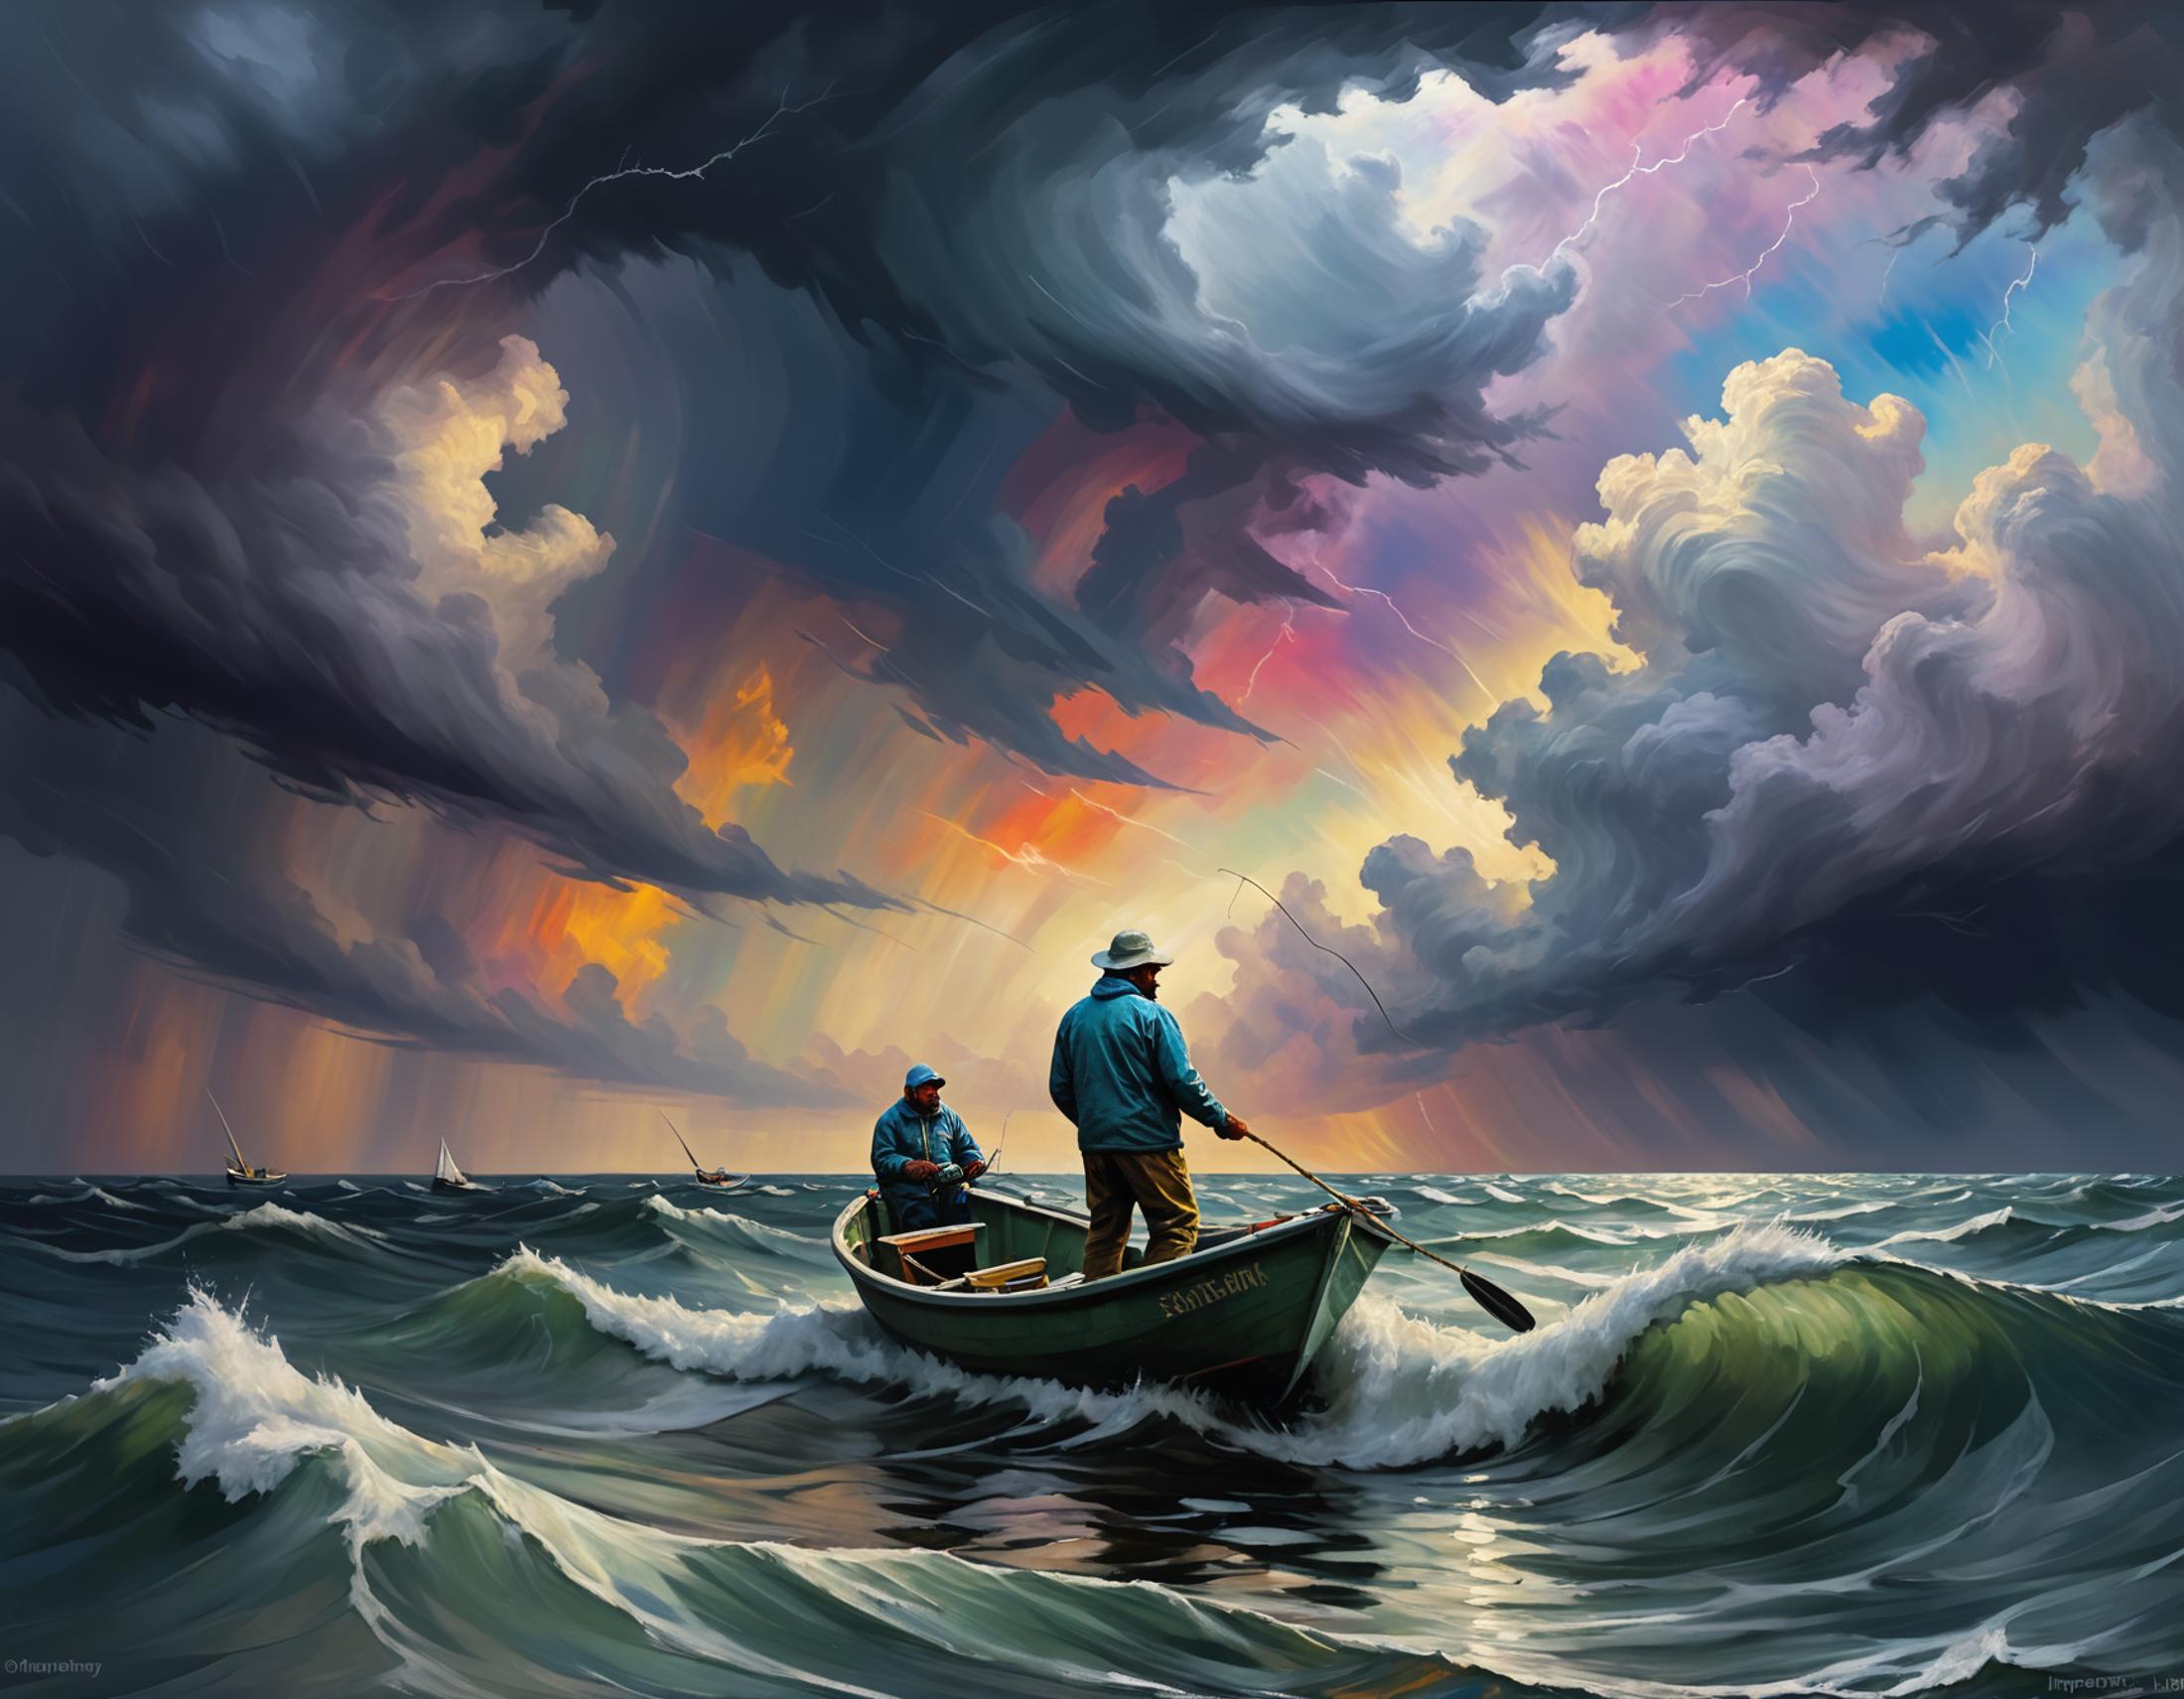 Two fishermen in a small boat in the ocean during a storm.